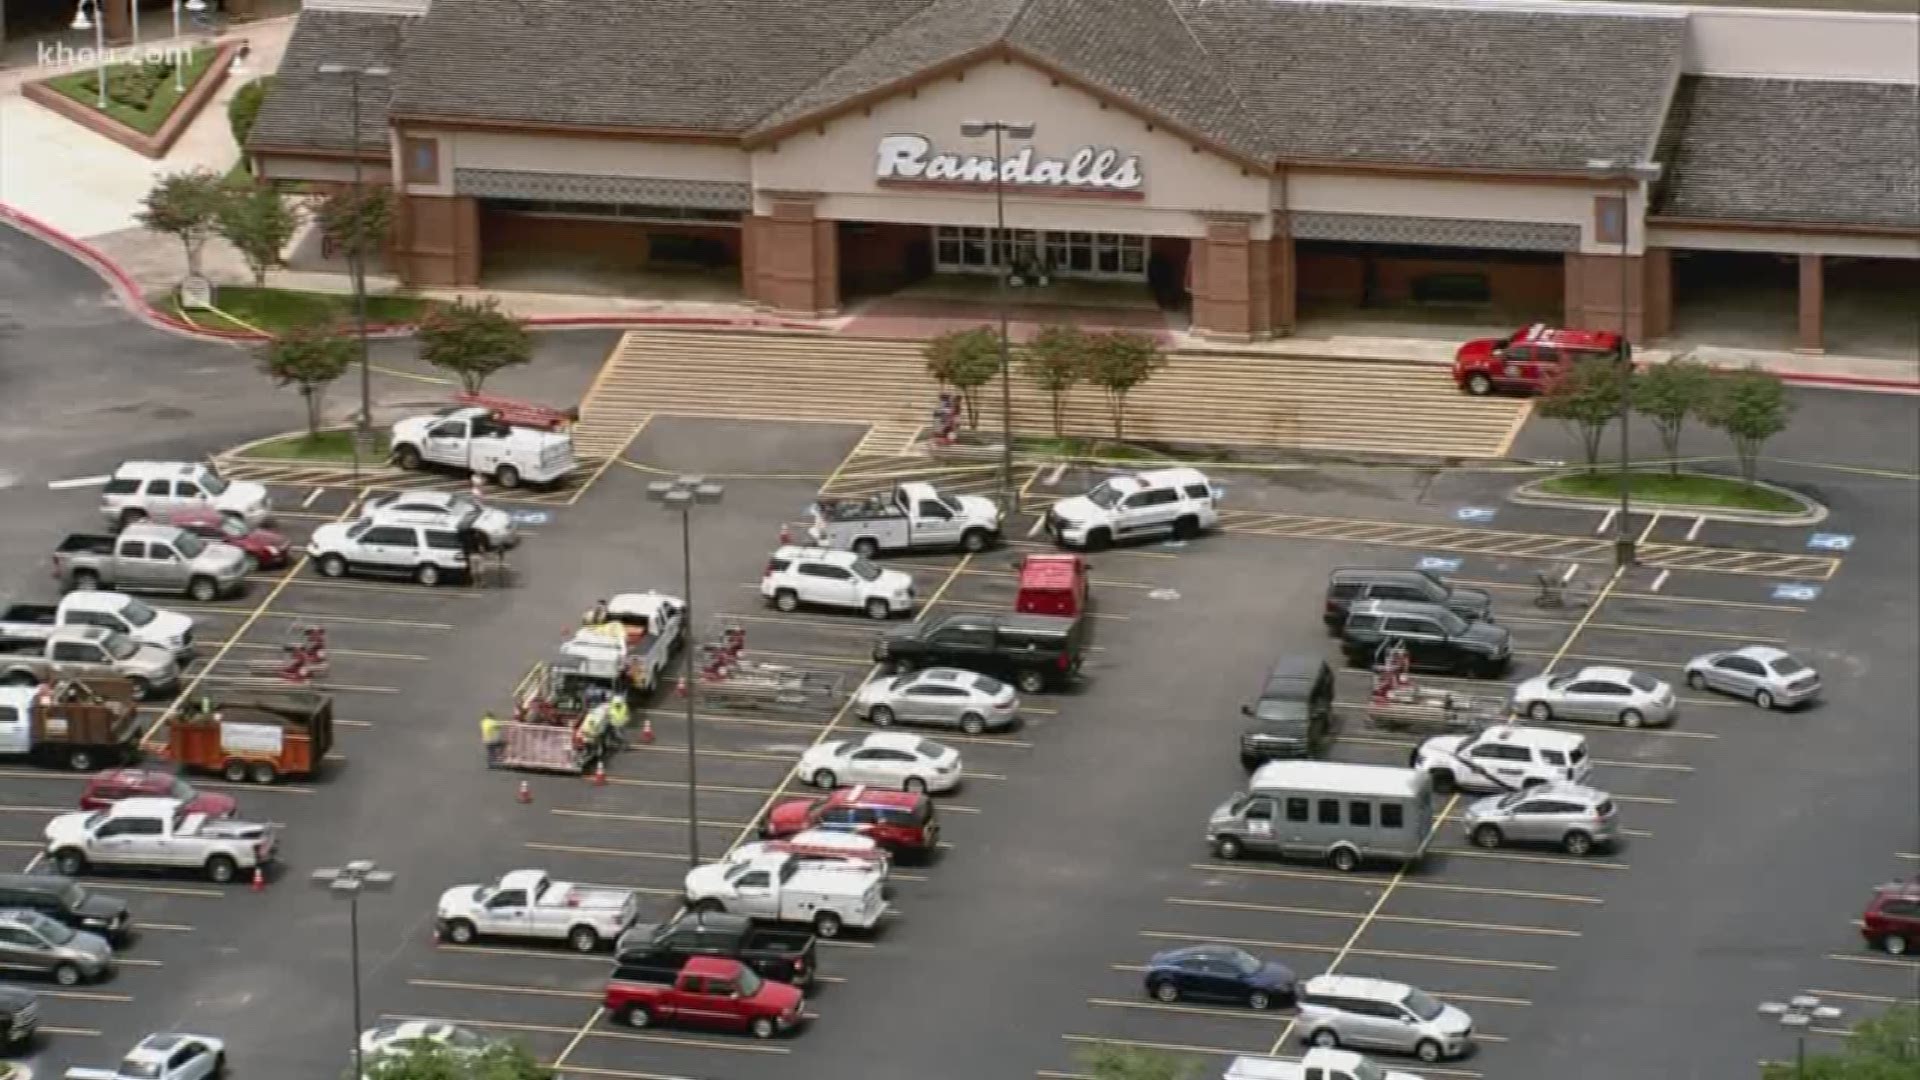 A refrigeration technician was badly injured in an incident at a Randall’s grocery store in The Woodlands Friday morning.